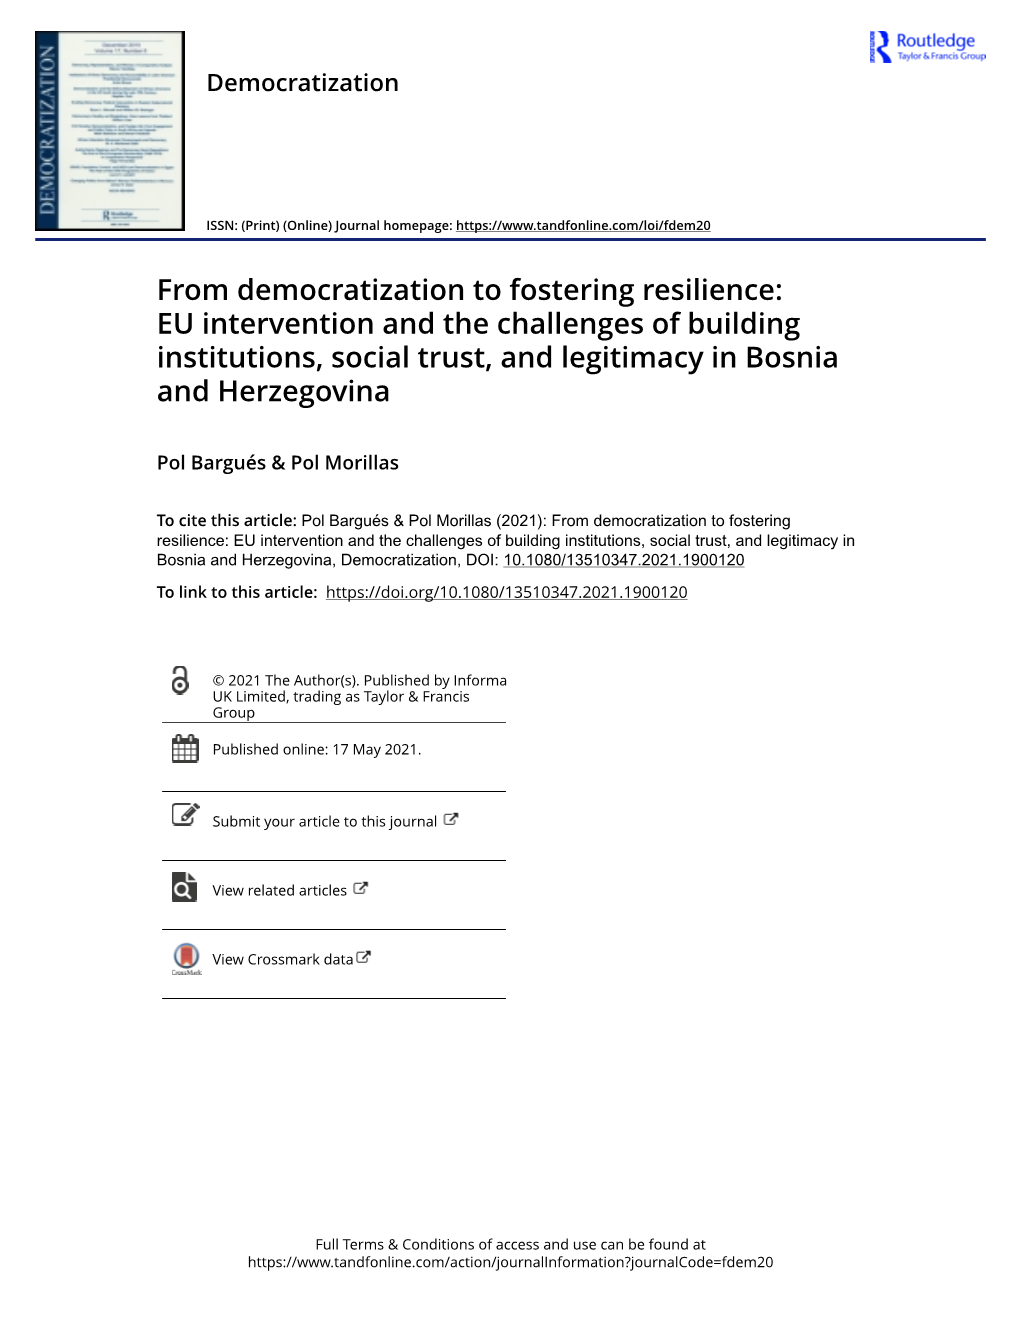 From Democratization to Fostering Resilience: EU Intervention and the Challenges of Building Institutions, Social Trust, and Legitimacy in Bosnia and Herzegovina